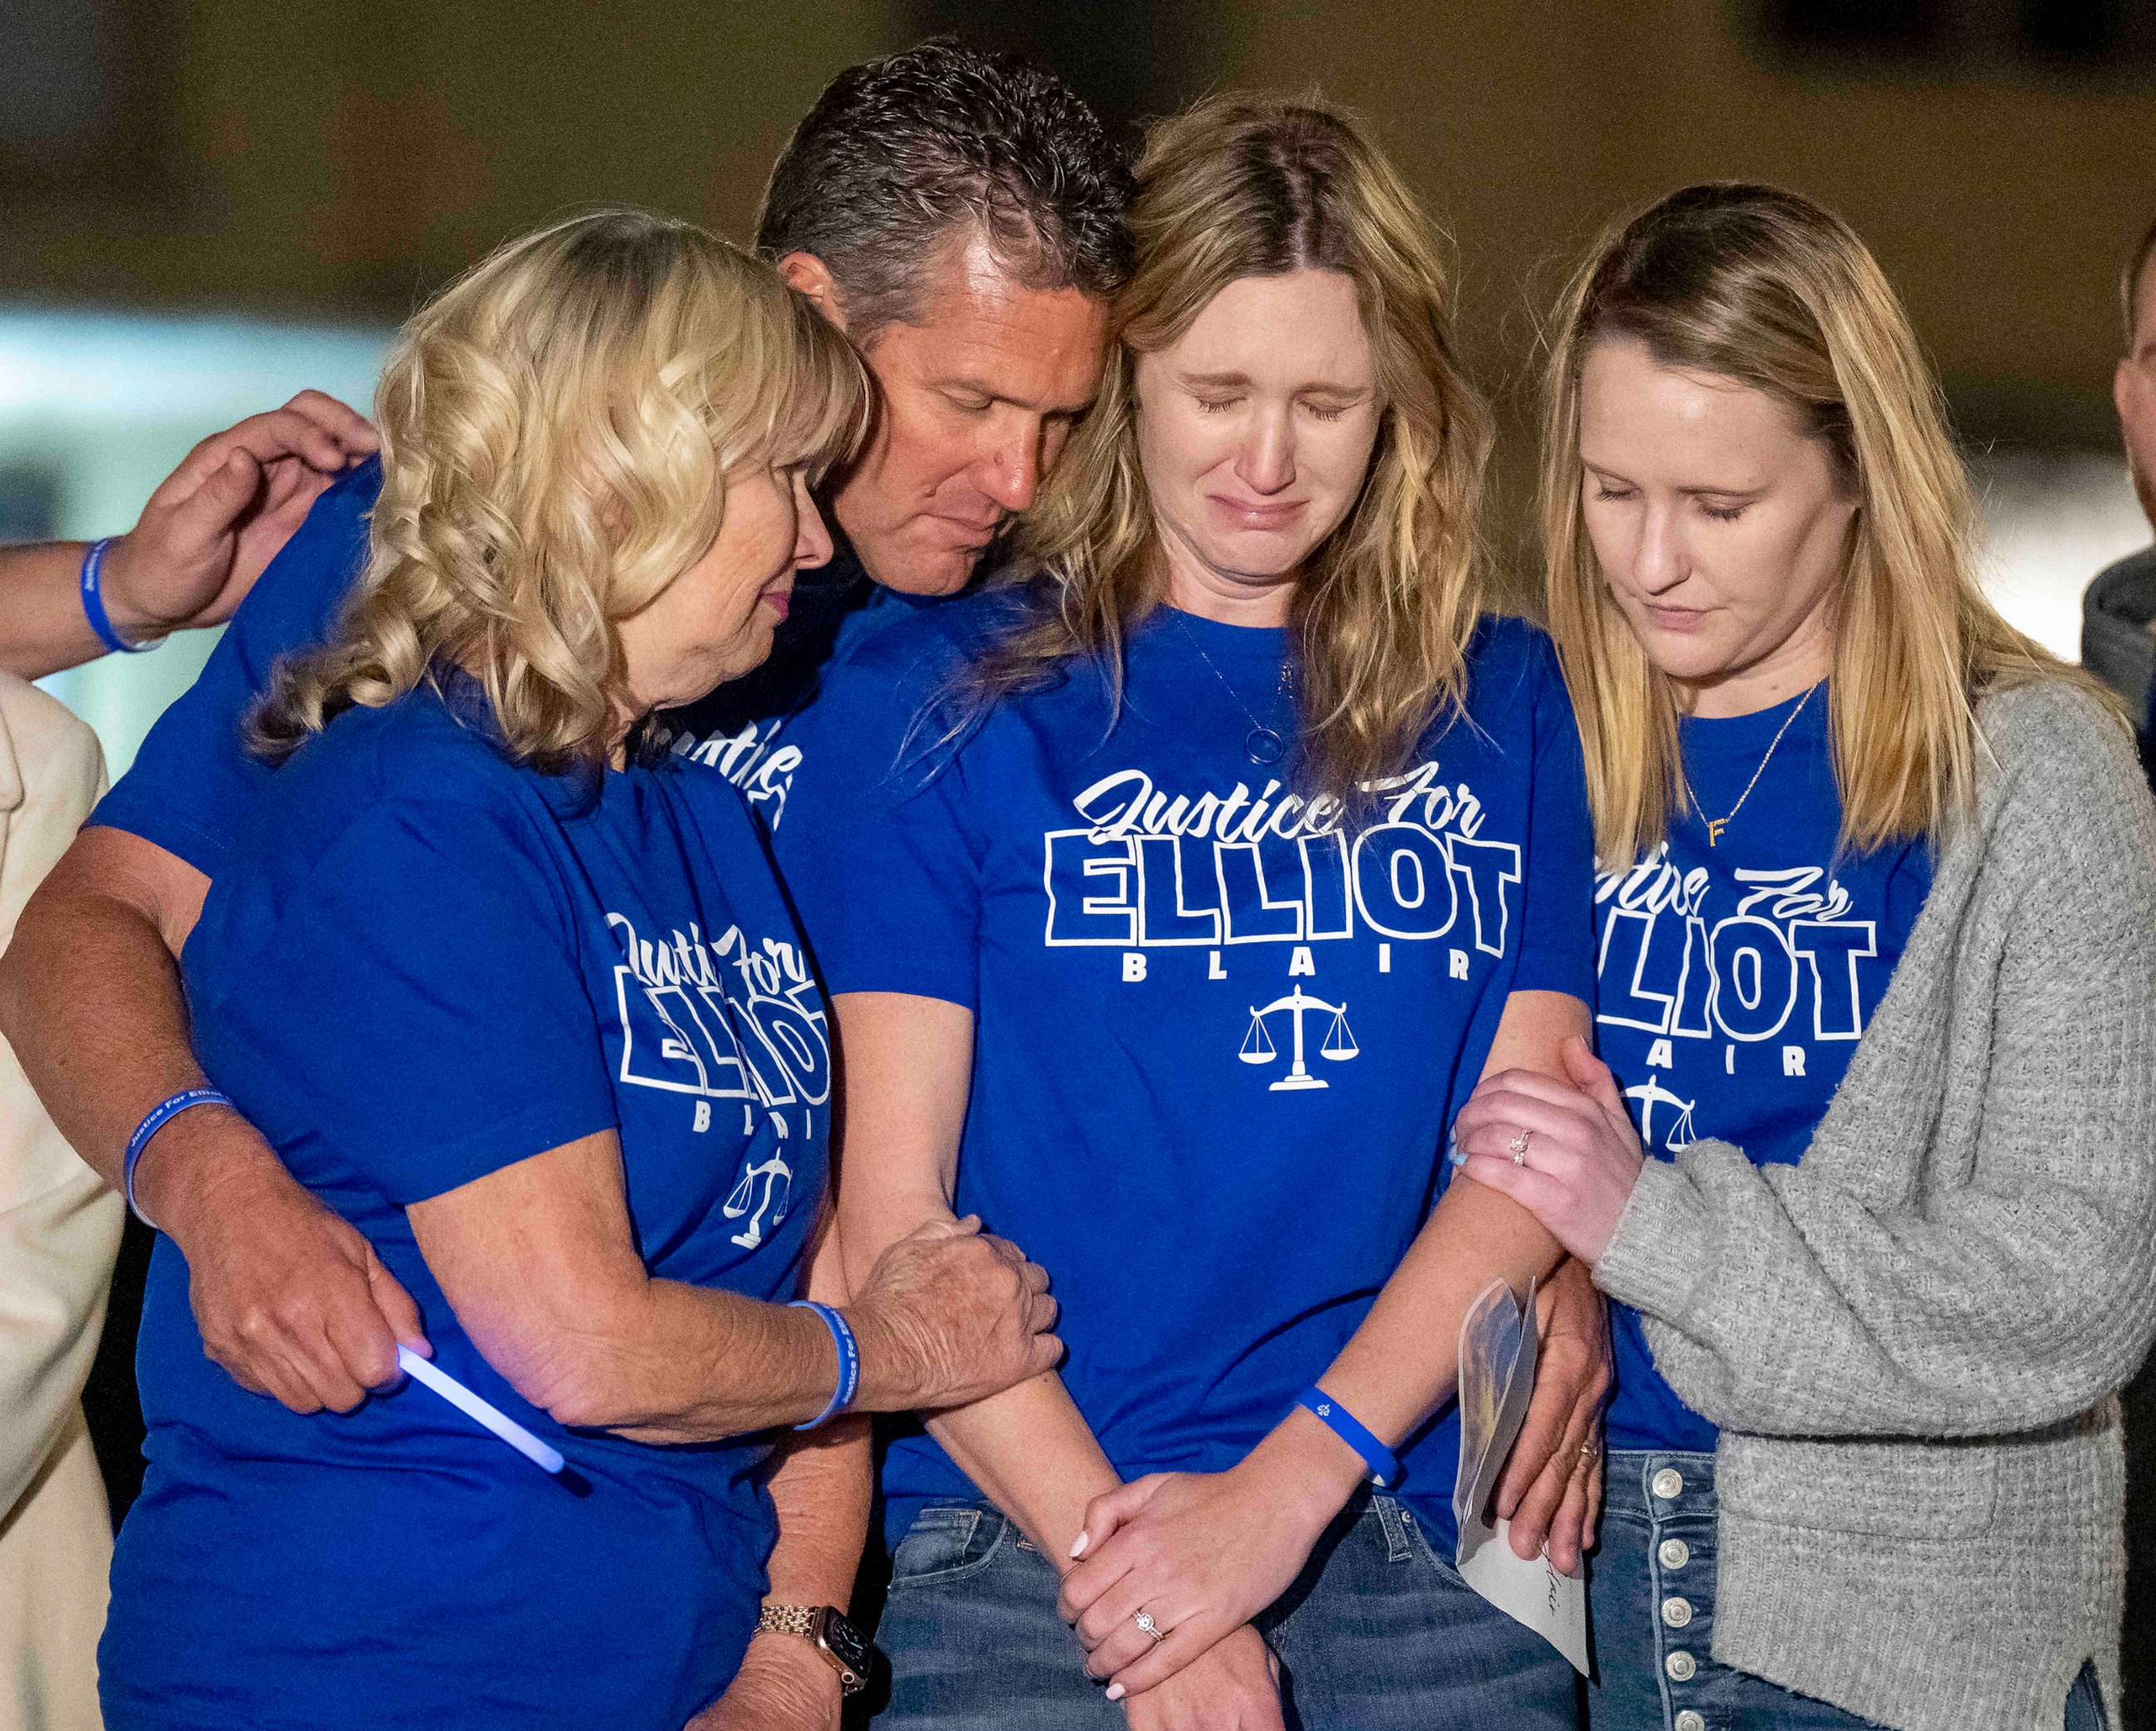 PHOTO: Kimberly Williams, second from right, the wife of Elliot Blair, is comforted by her family during a candlelight vigil in Orange, Calif., Jan 26, 2023, for Orange County deputy public defender Elliot Blair who died in Mexico.